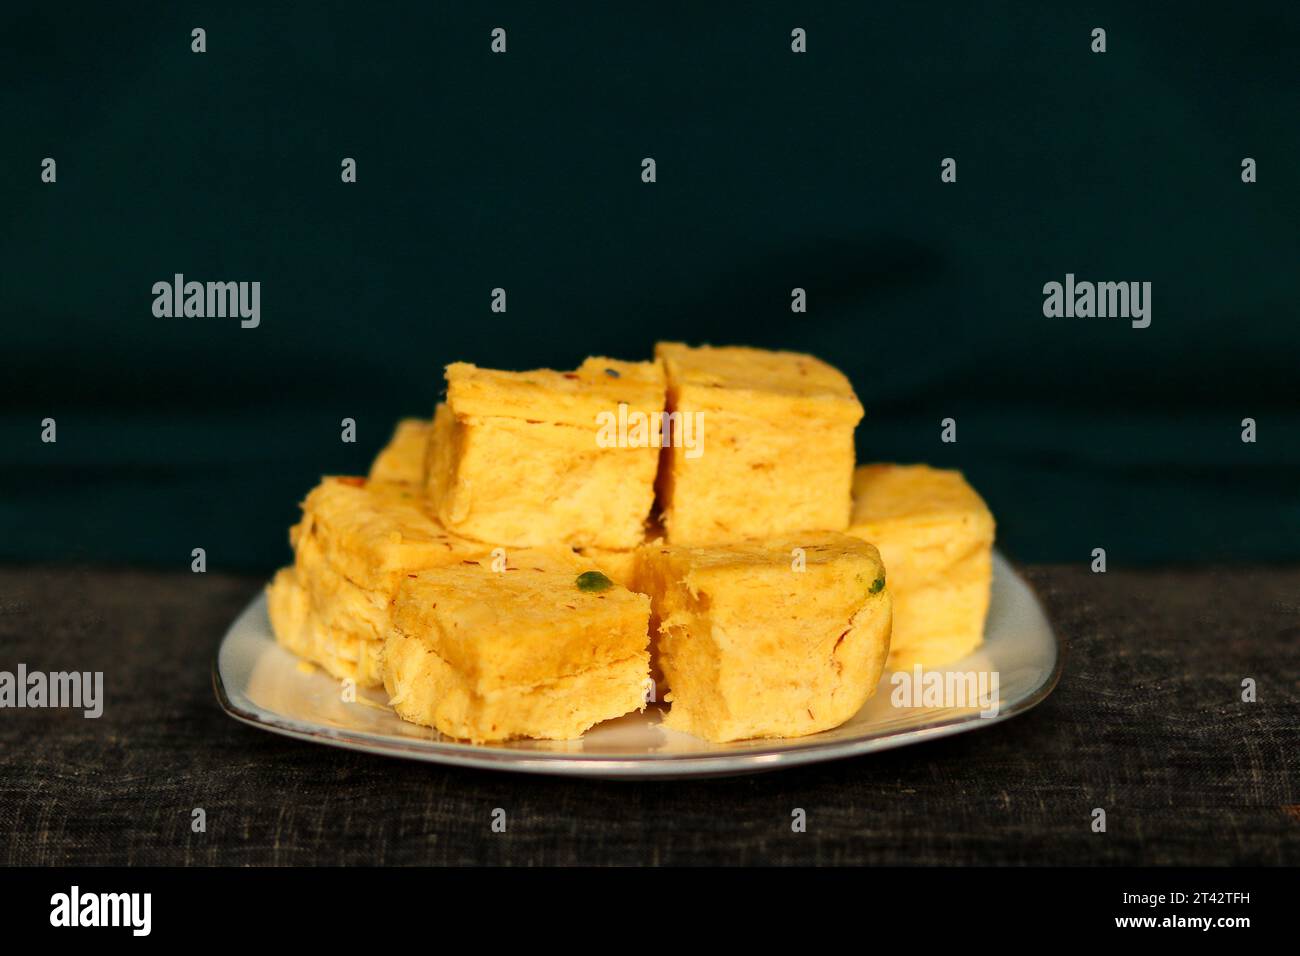 Fresh delicious soan papdi sweets, A served plate of Indian soan papdi sweet, Stock Photo